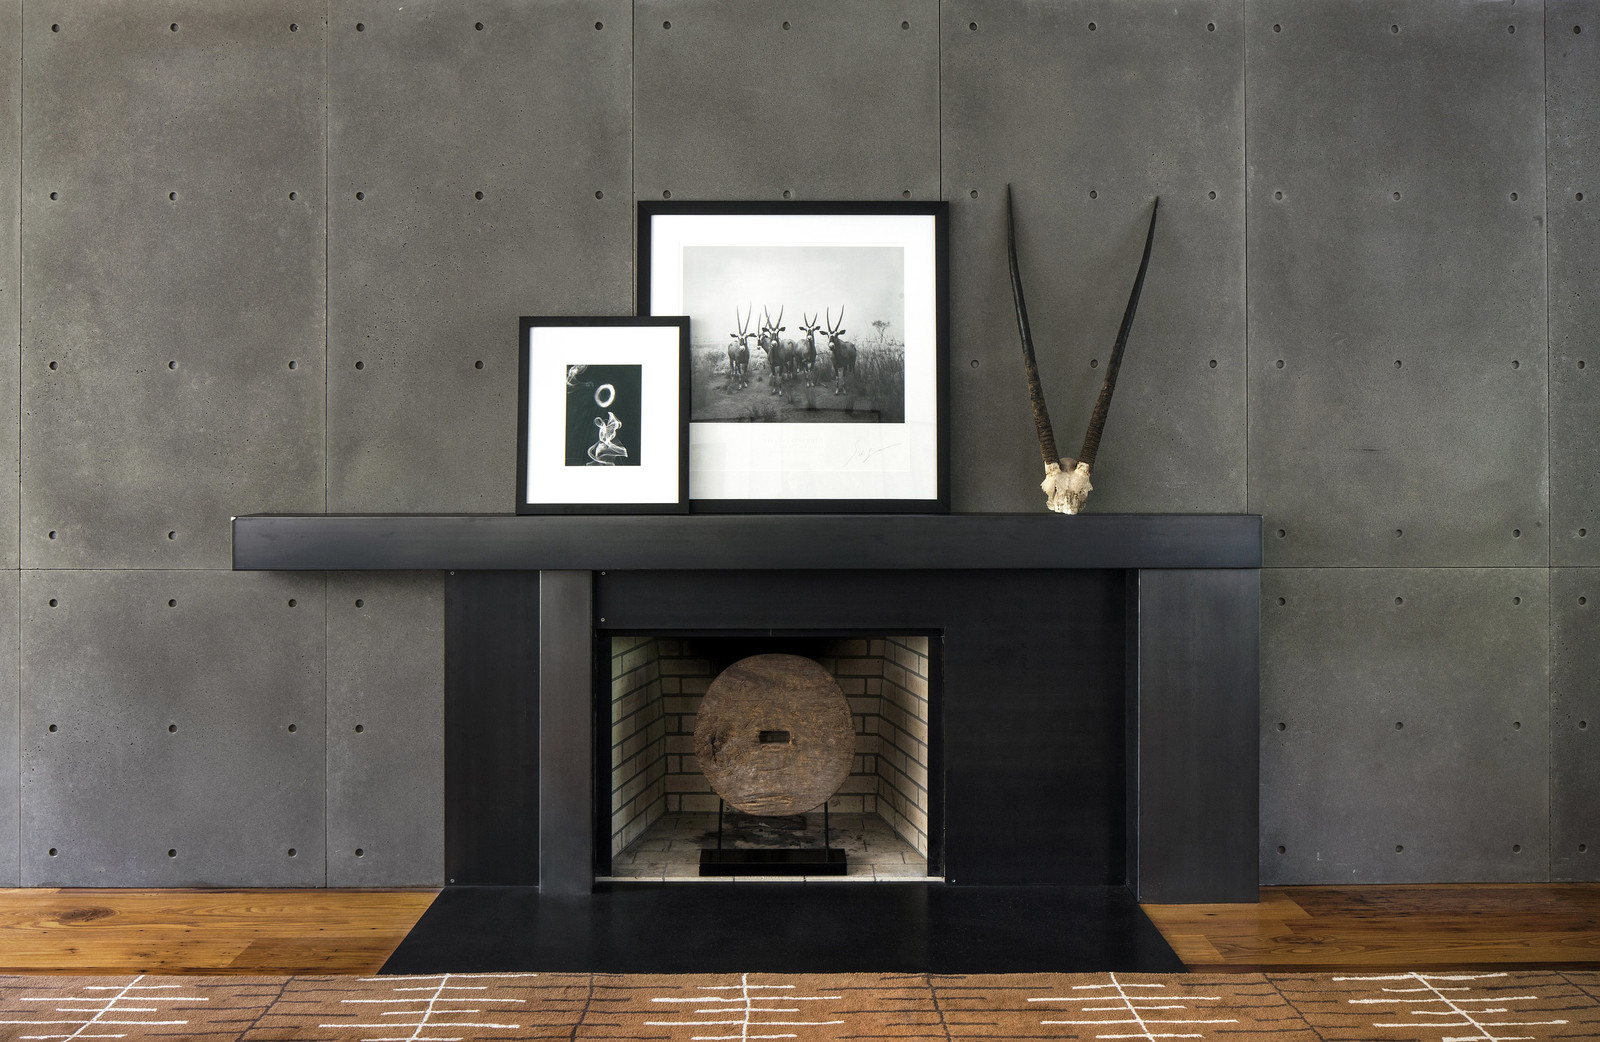 Sculpture in the modern black fireplace